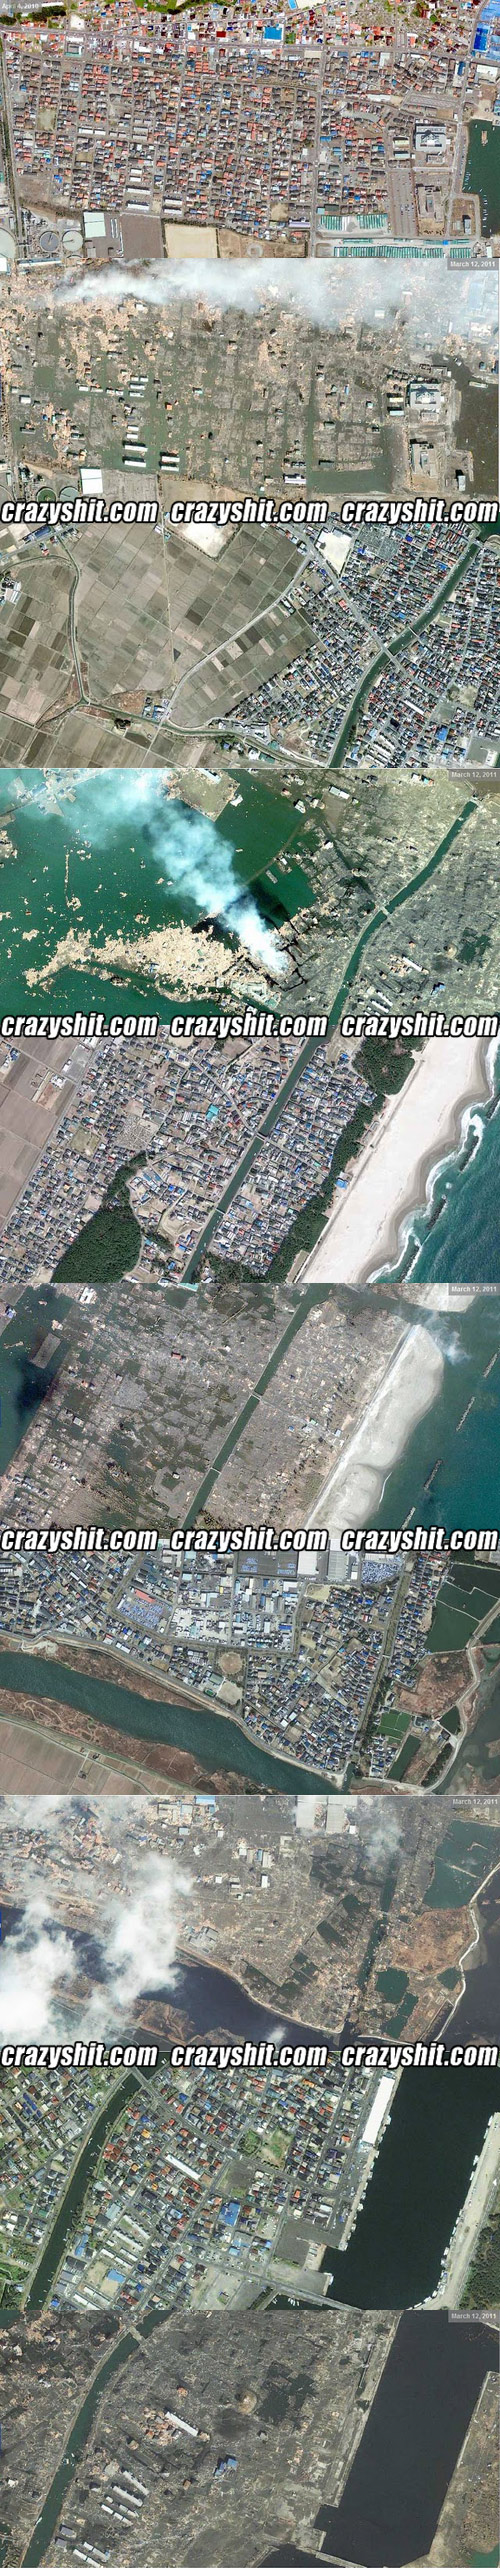 Before And After Tsunami Satellite Images